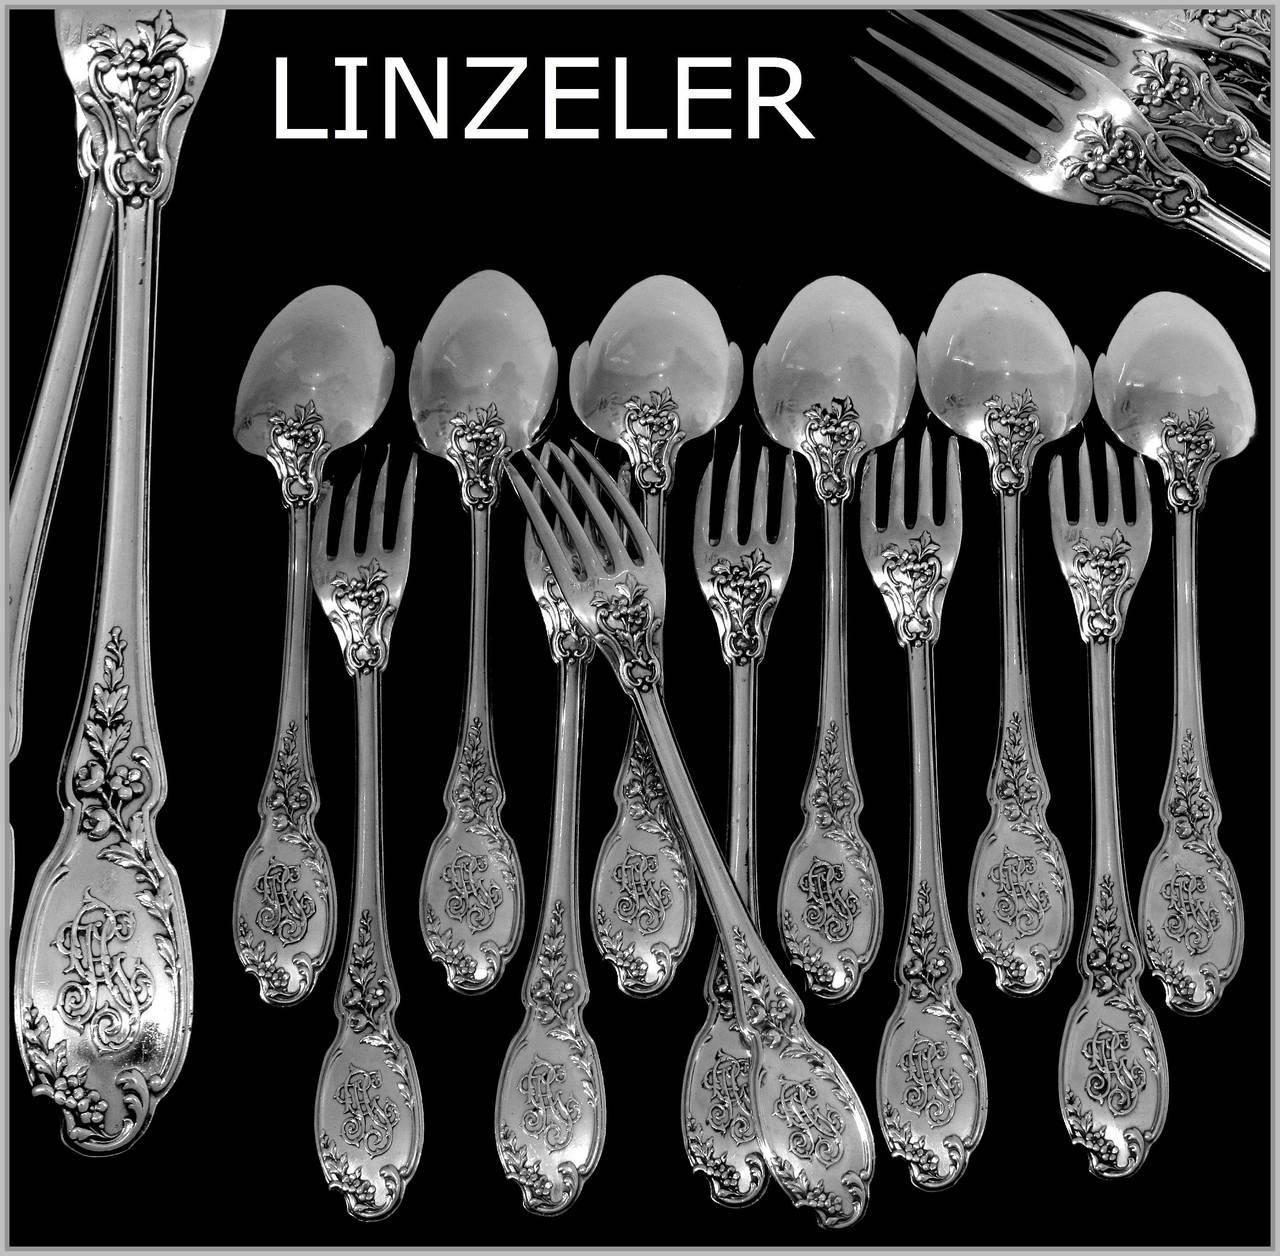 Linzeler French Sterling Silver Dessert/Entremet Flatware Set 12 pc Rococo

Head of Minerve 1st titre for 950/1000 French sterling silver guarantee.

Fabulous French sterling silver flatware with fantastic decoration in the Rococo style with flowers